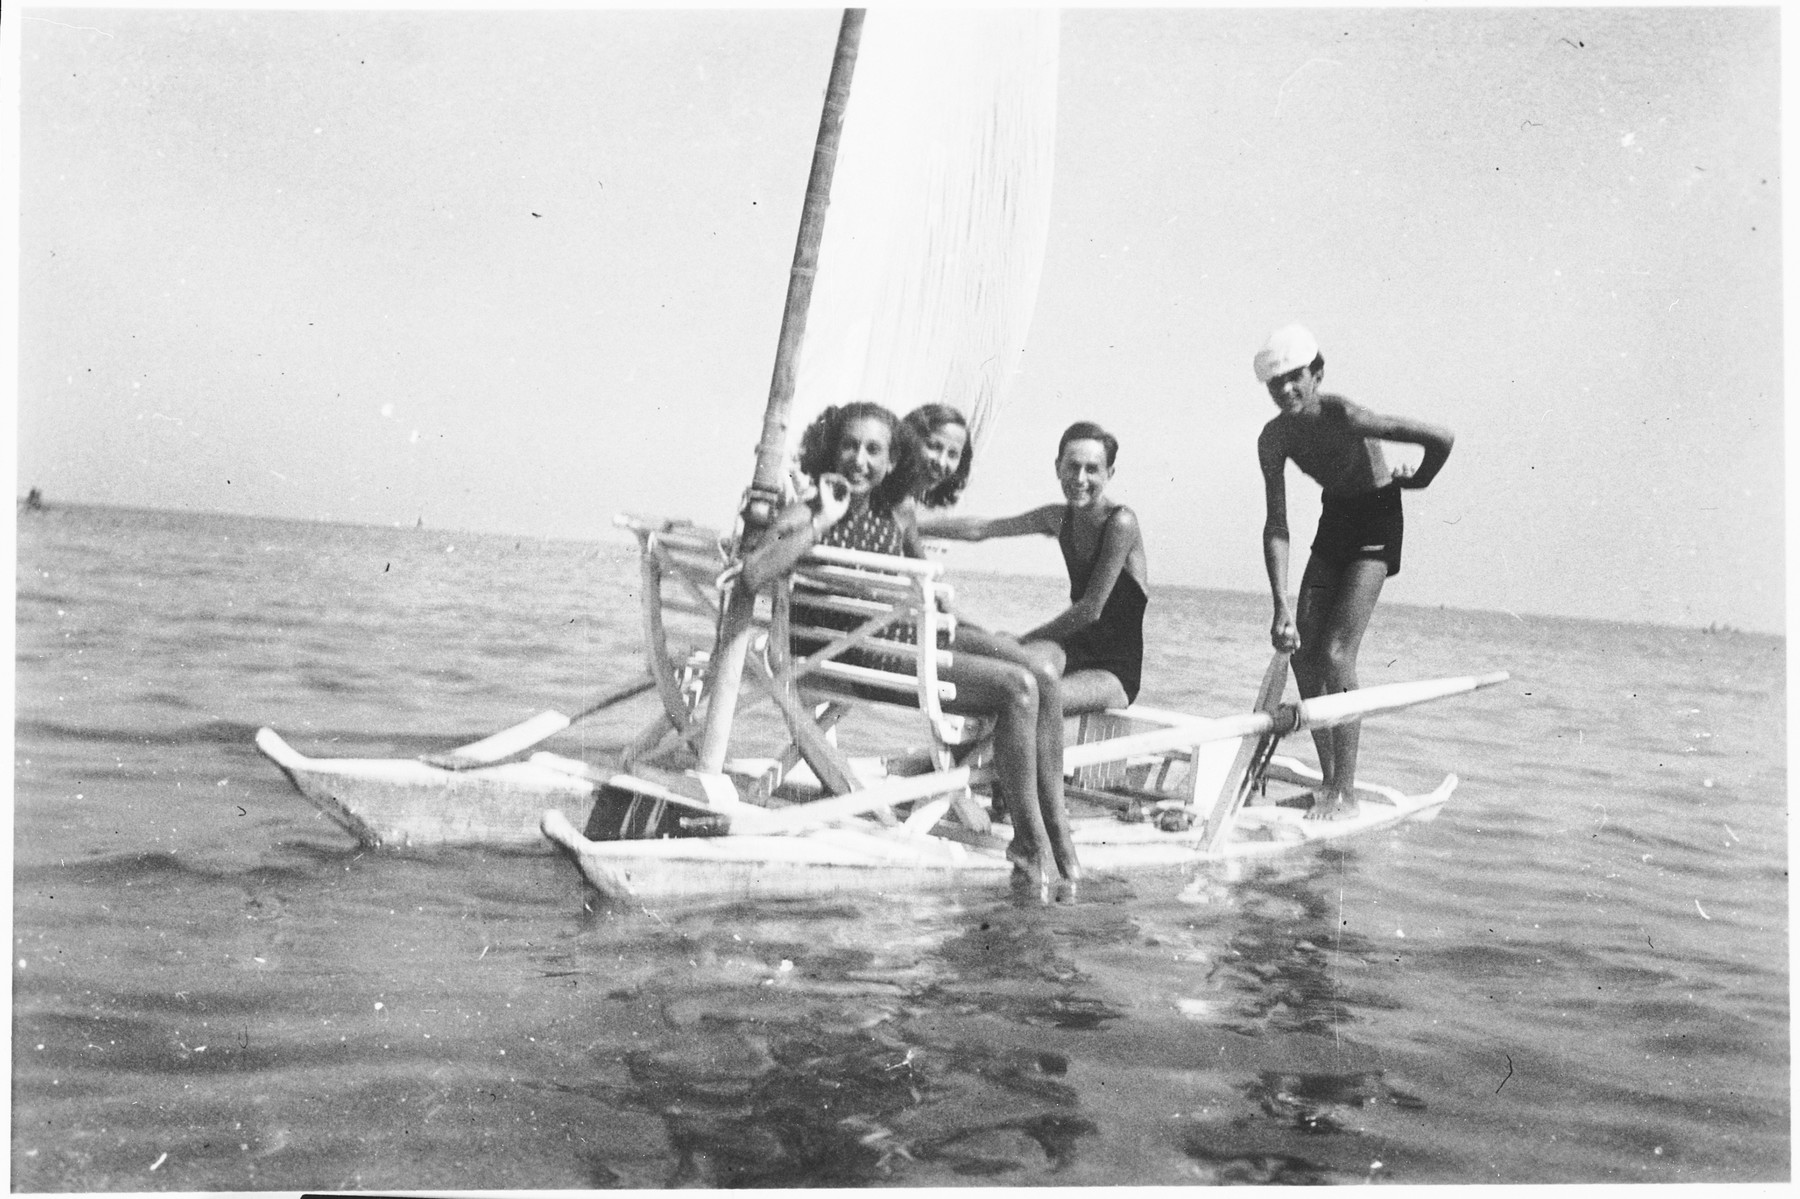 Anna Falco goes sailing in the Adriatic sea with other friends from the Jewish high school while on vacation in Senigallia.